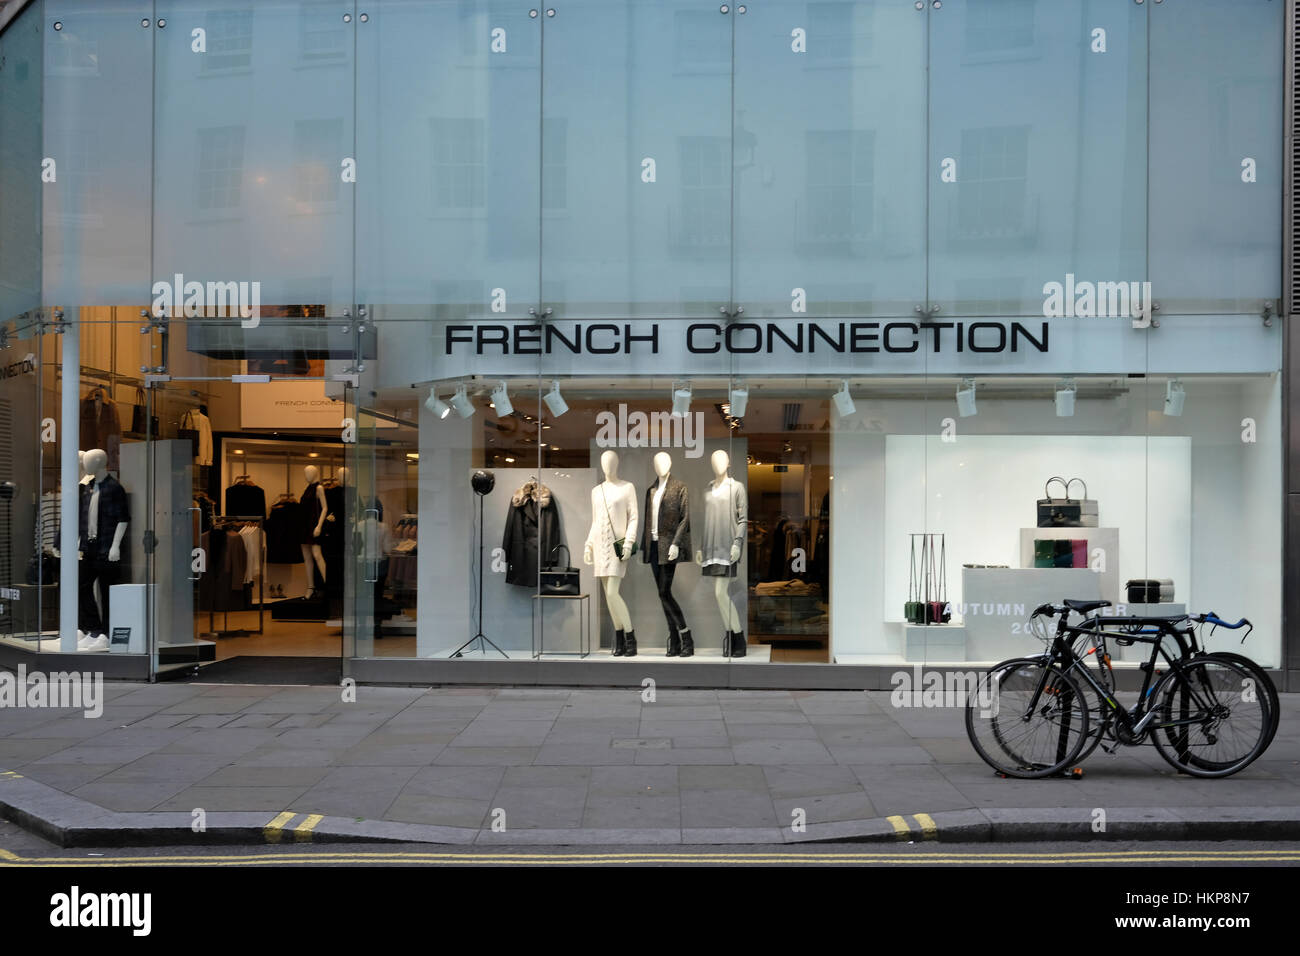 French Connection Store High Resolution Stock Photography and Images - Alamy